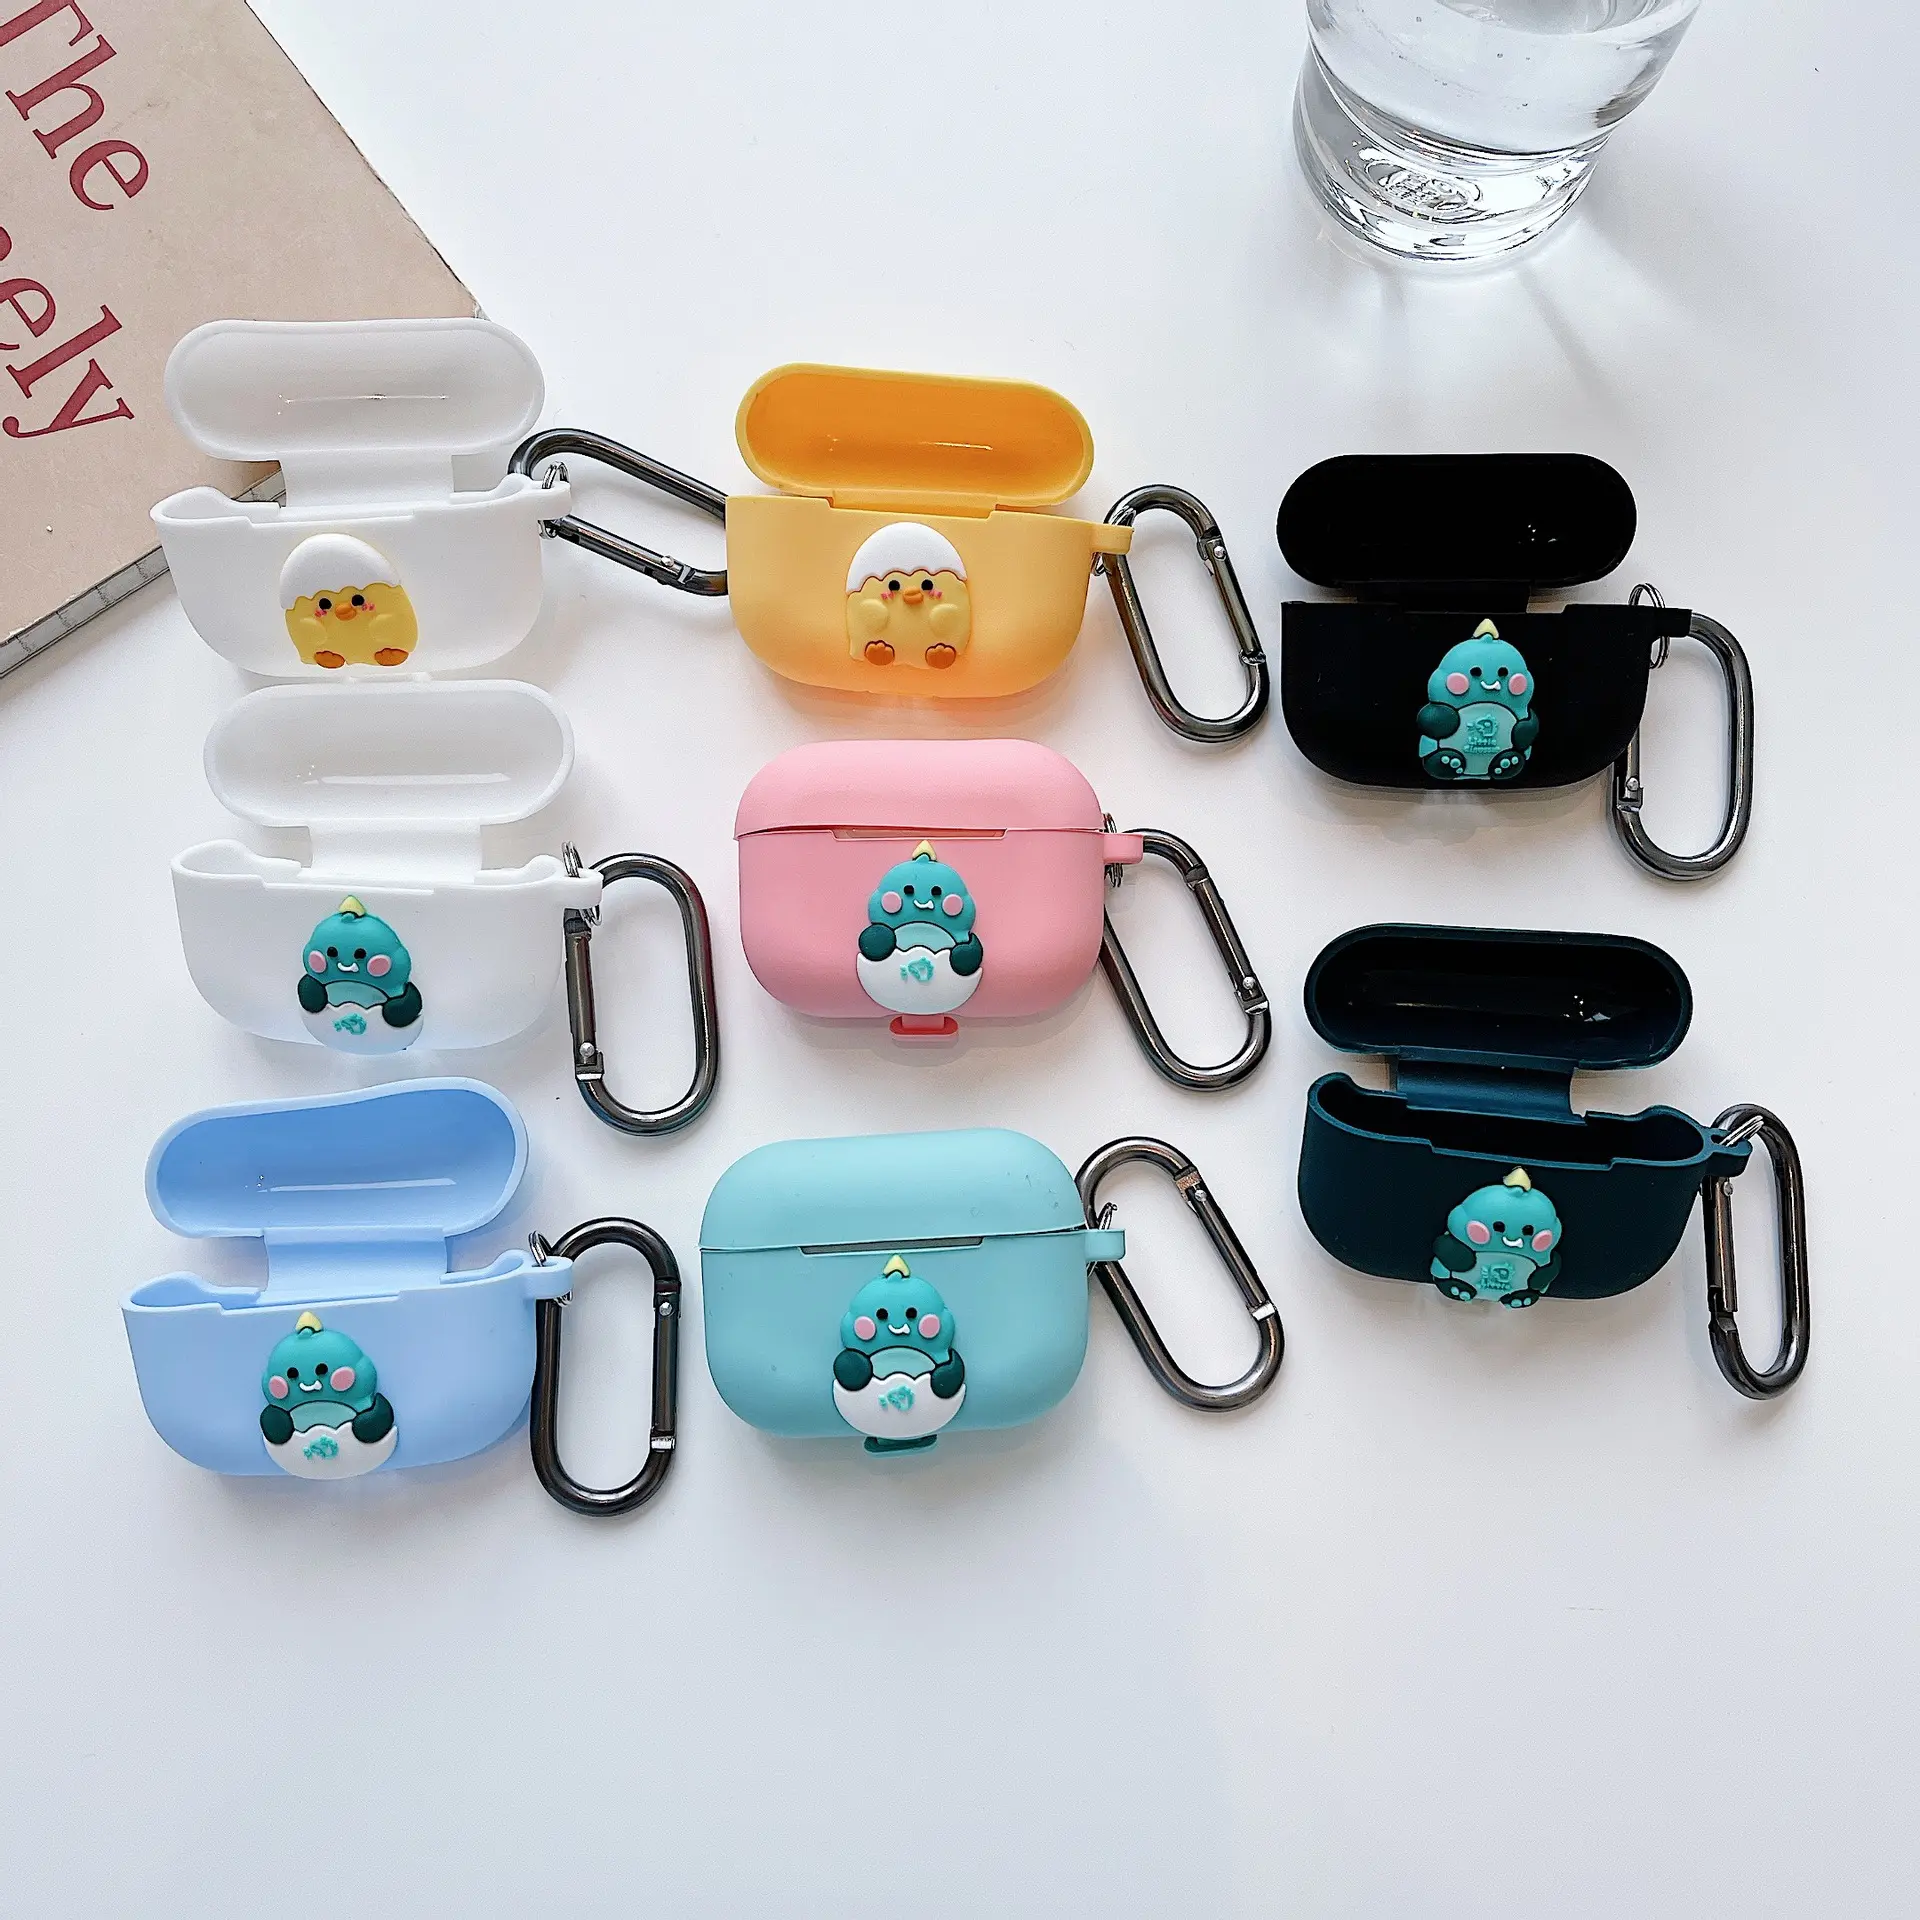 Wholesale 3D Cute Girls Keychain Cartoon Earphone Cover Cases For iPods Designers For Airpods Pro Case